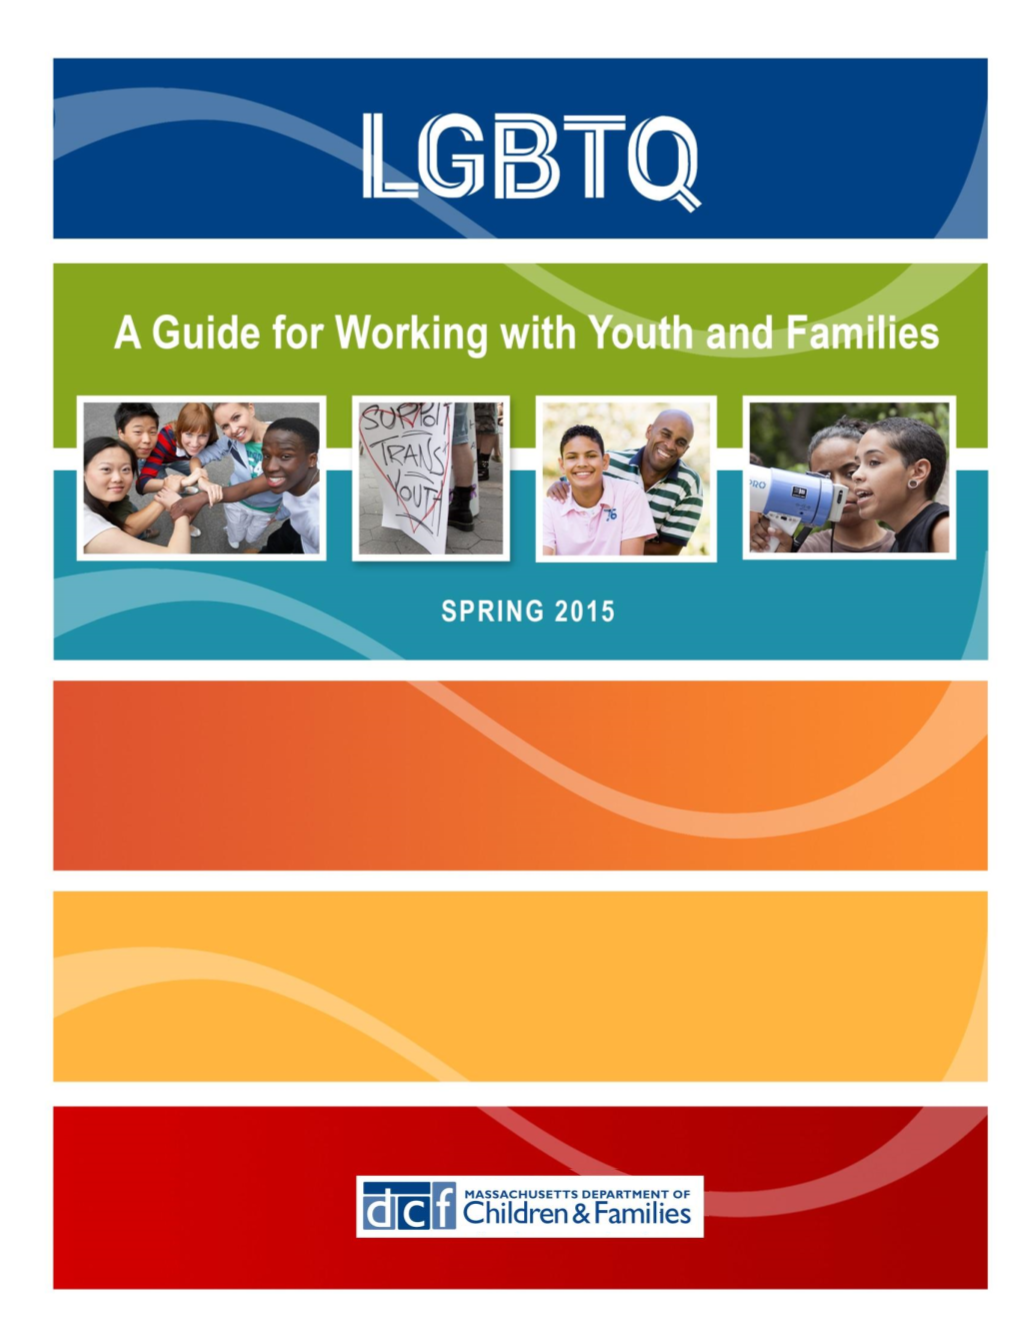 LGBTQ: a Guide for Working with Youth and Families